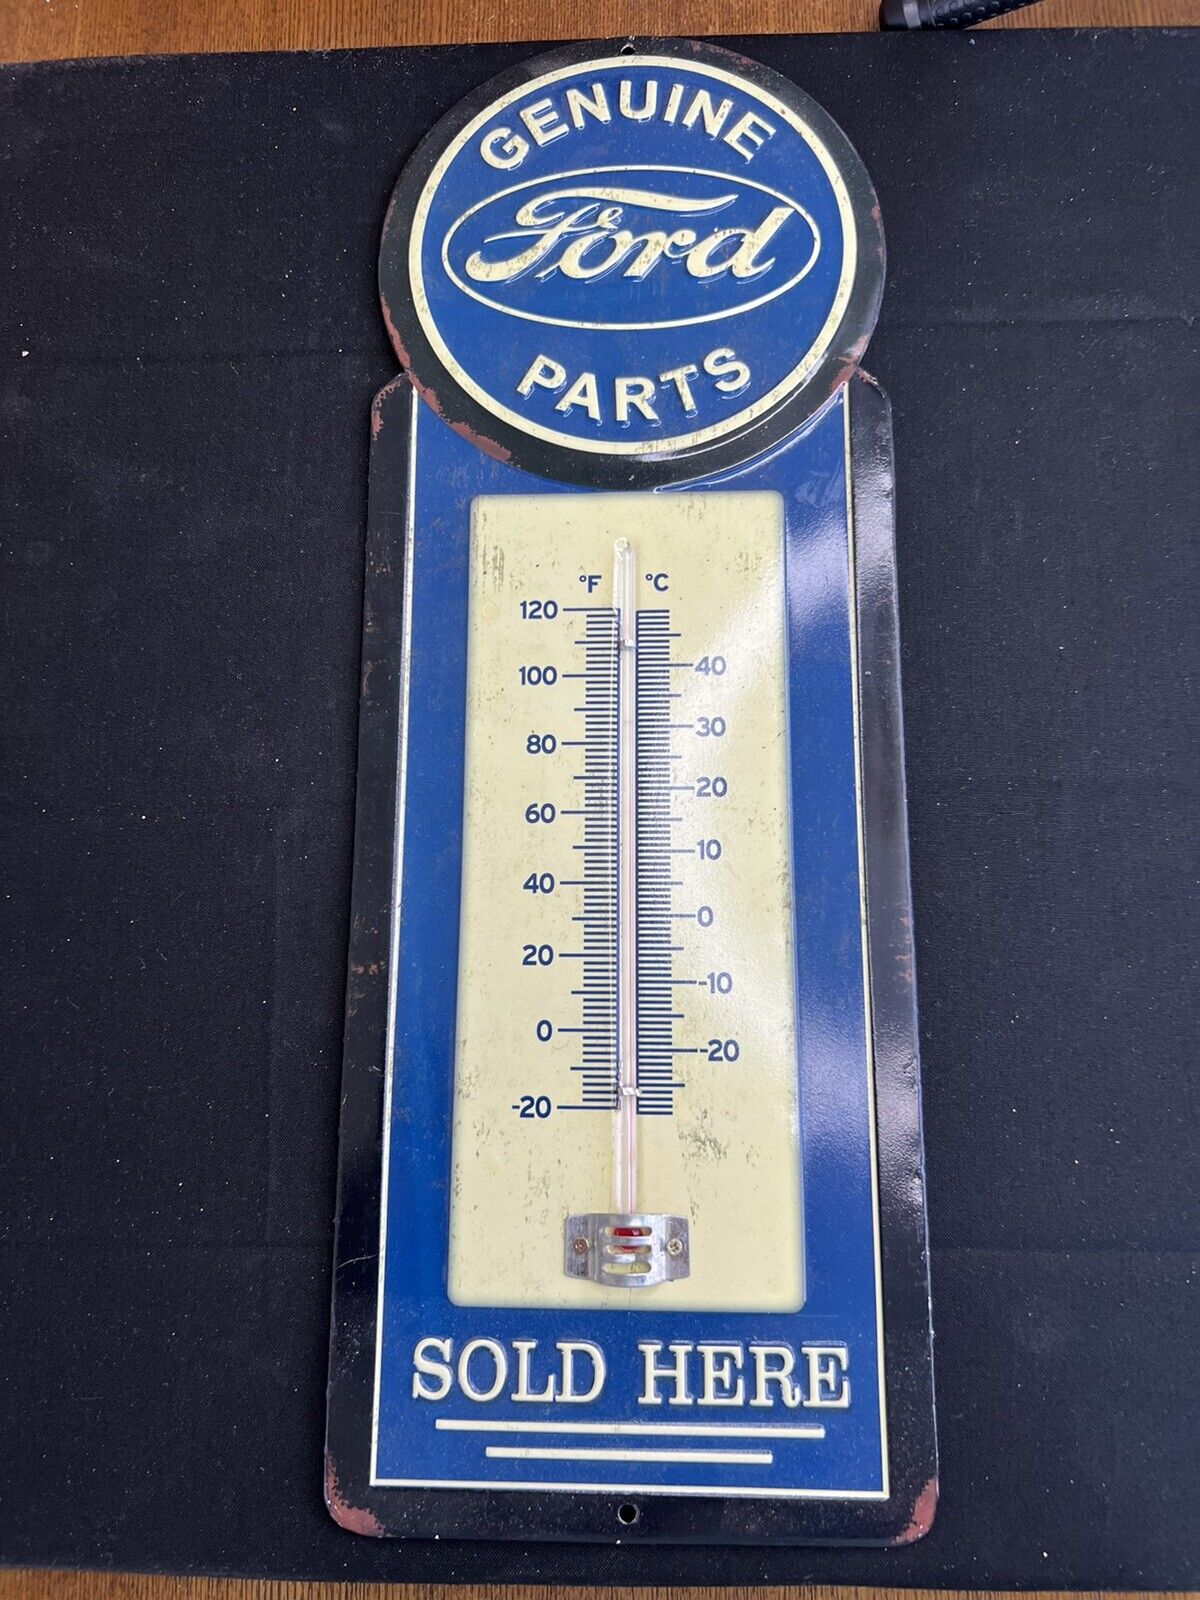 15” X 5” Large Ford Metal Thermometer Wall Decoration Man Cave Home Decor Garage